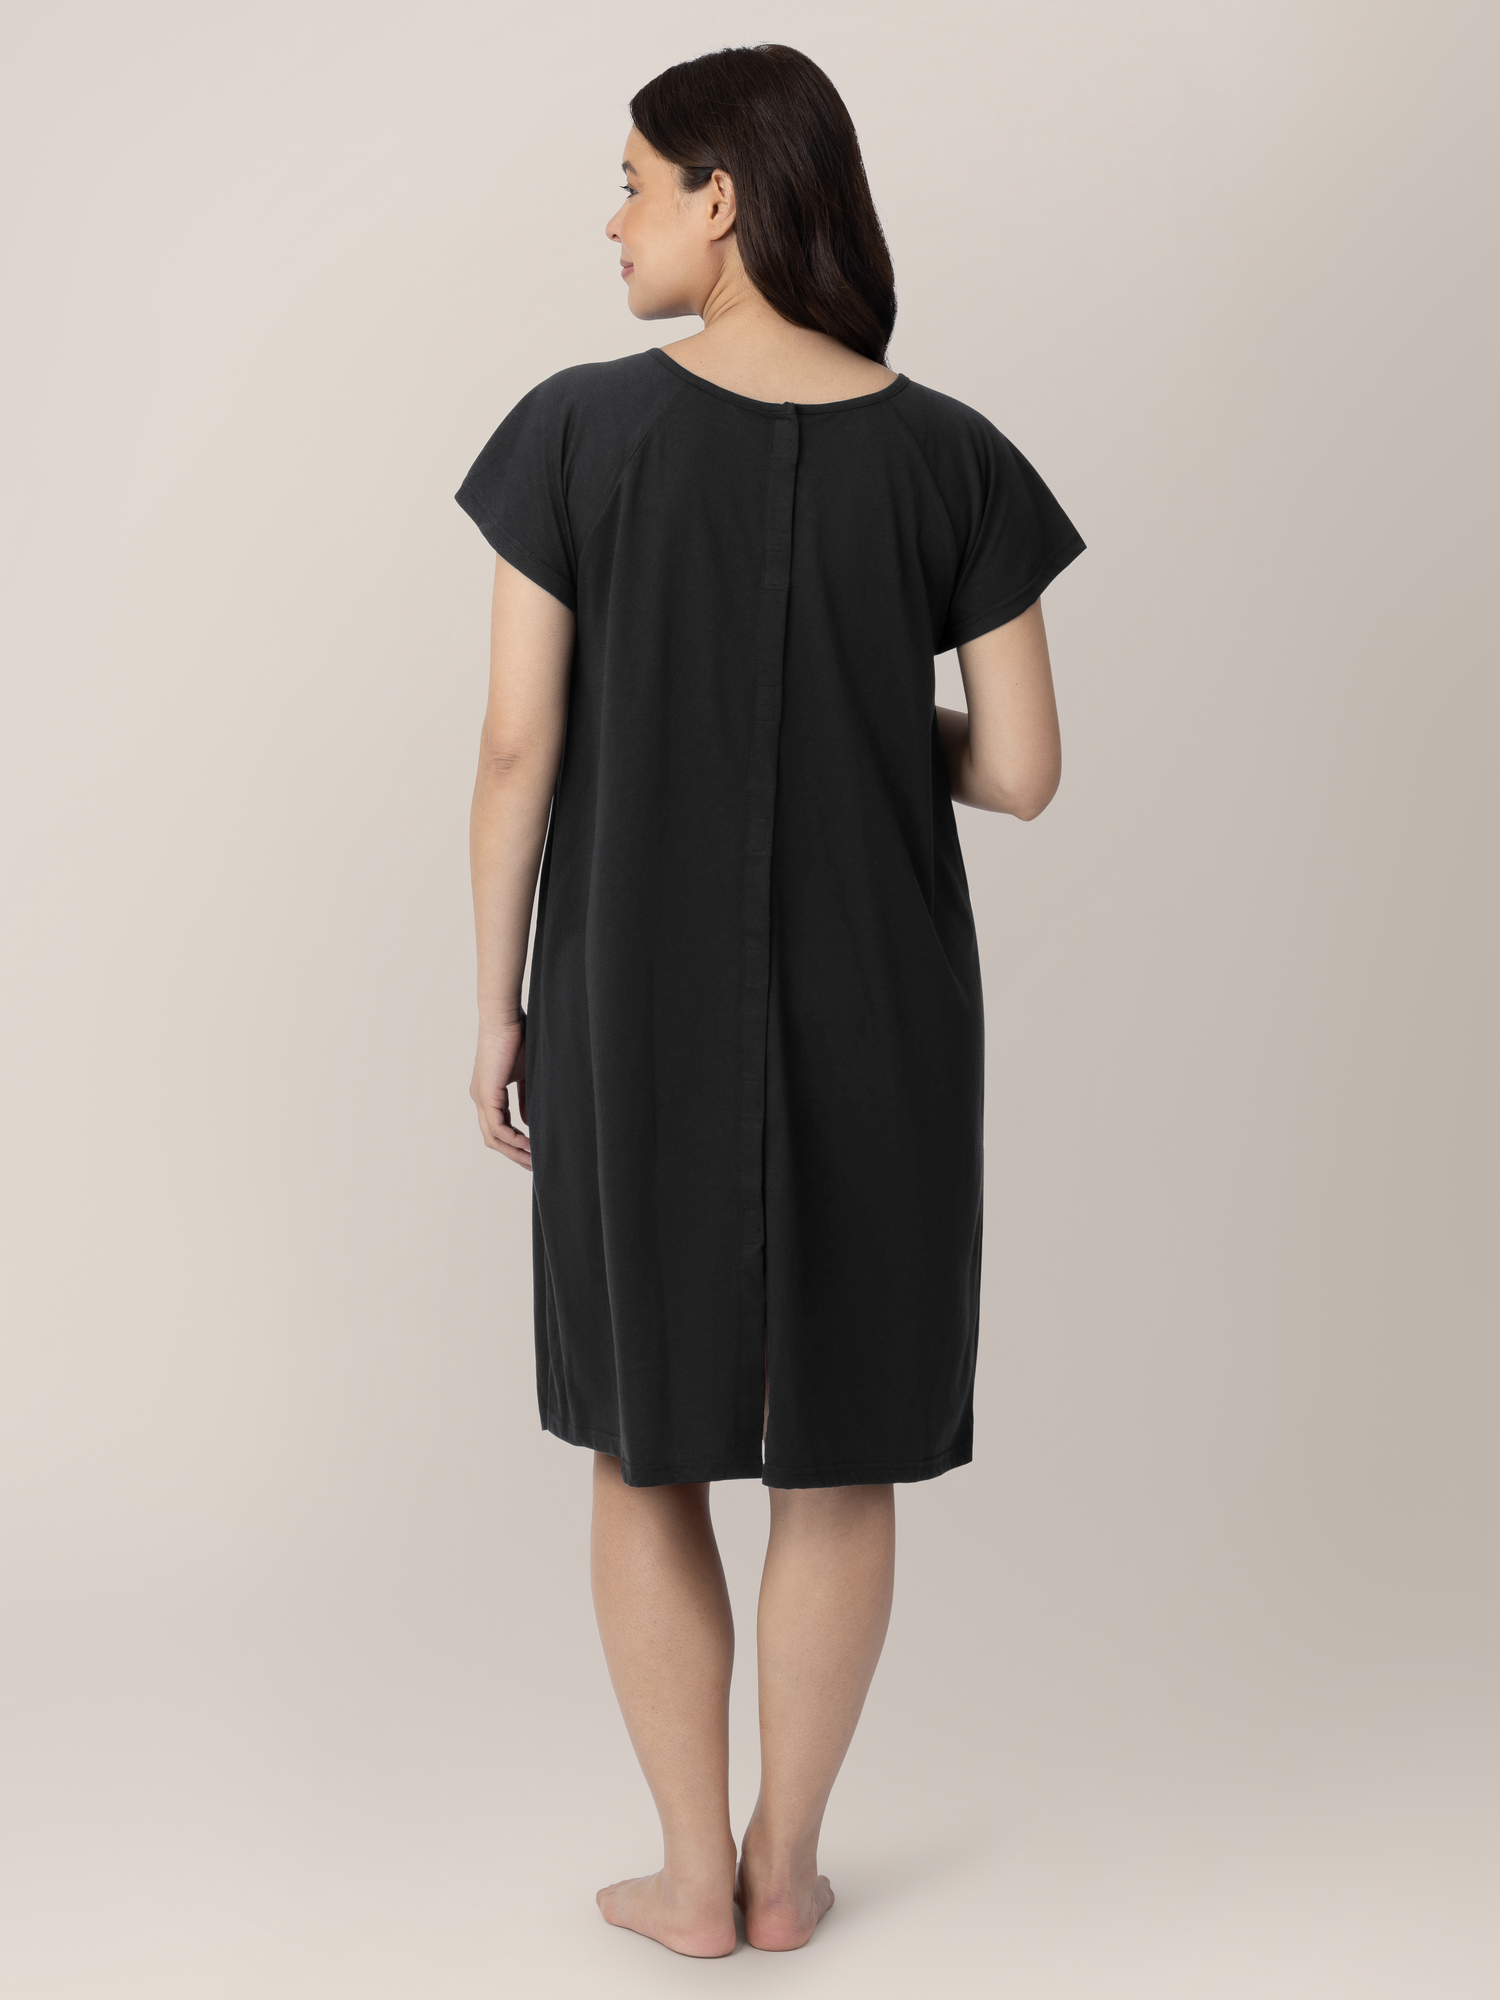 Universal Labor & Delivery Gown | Black